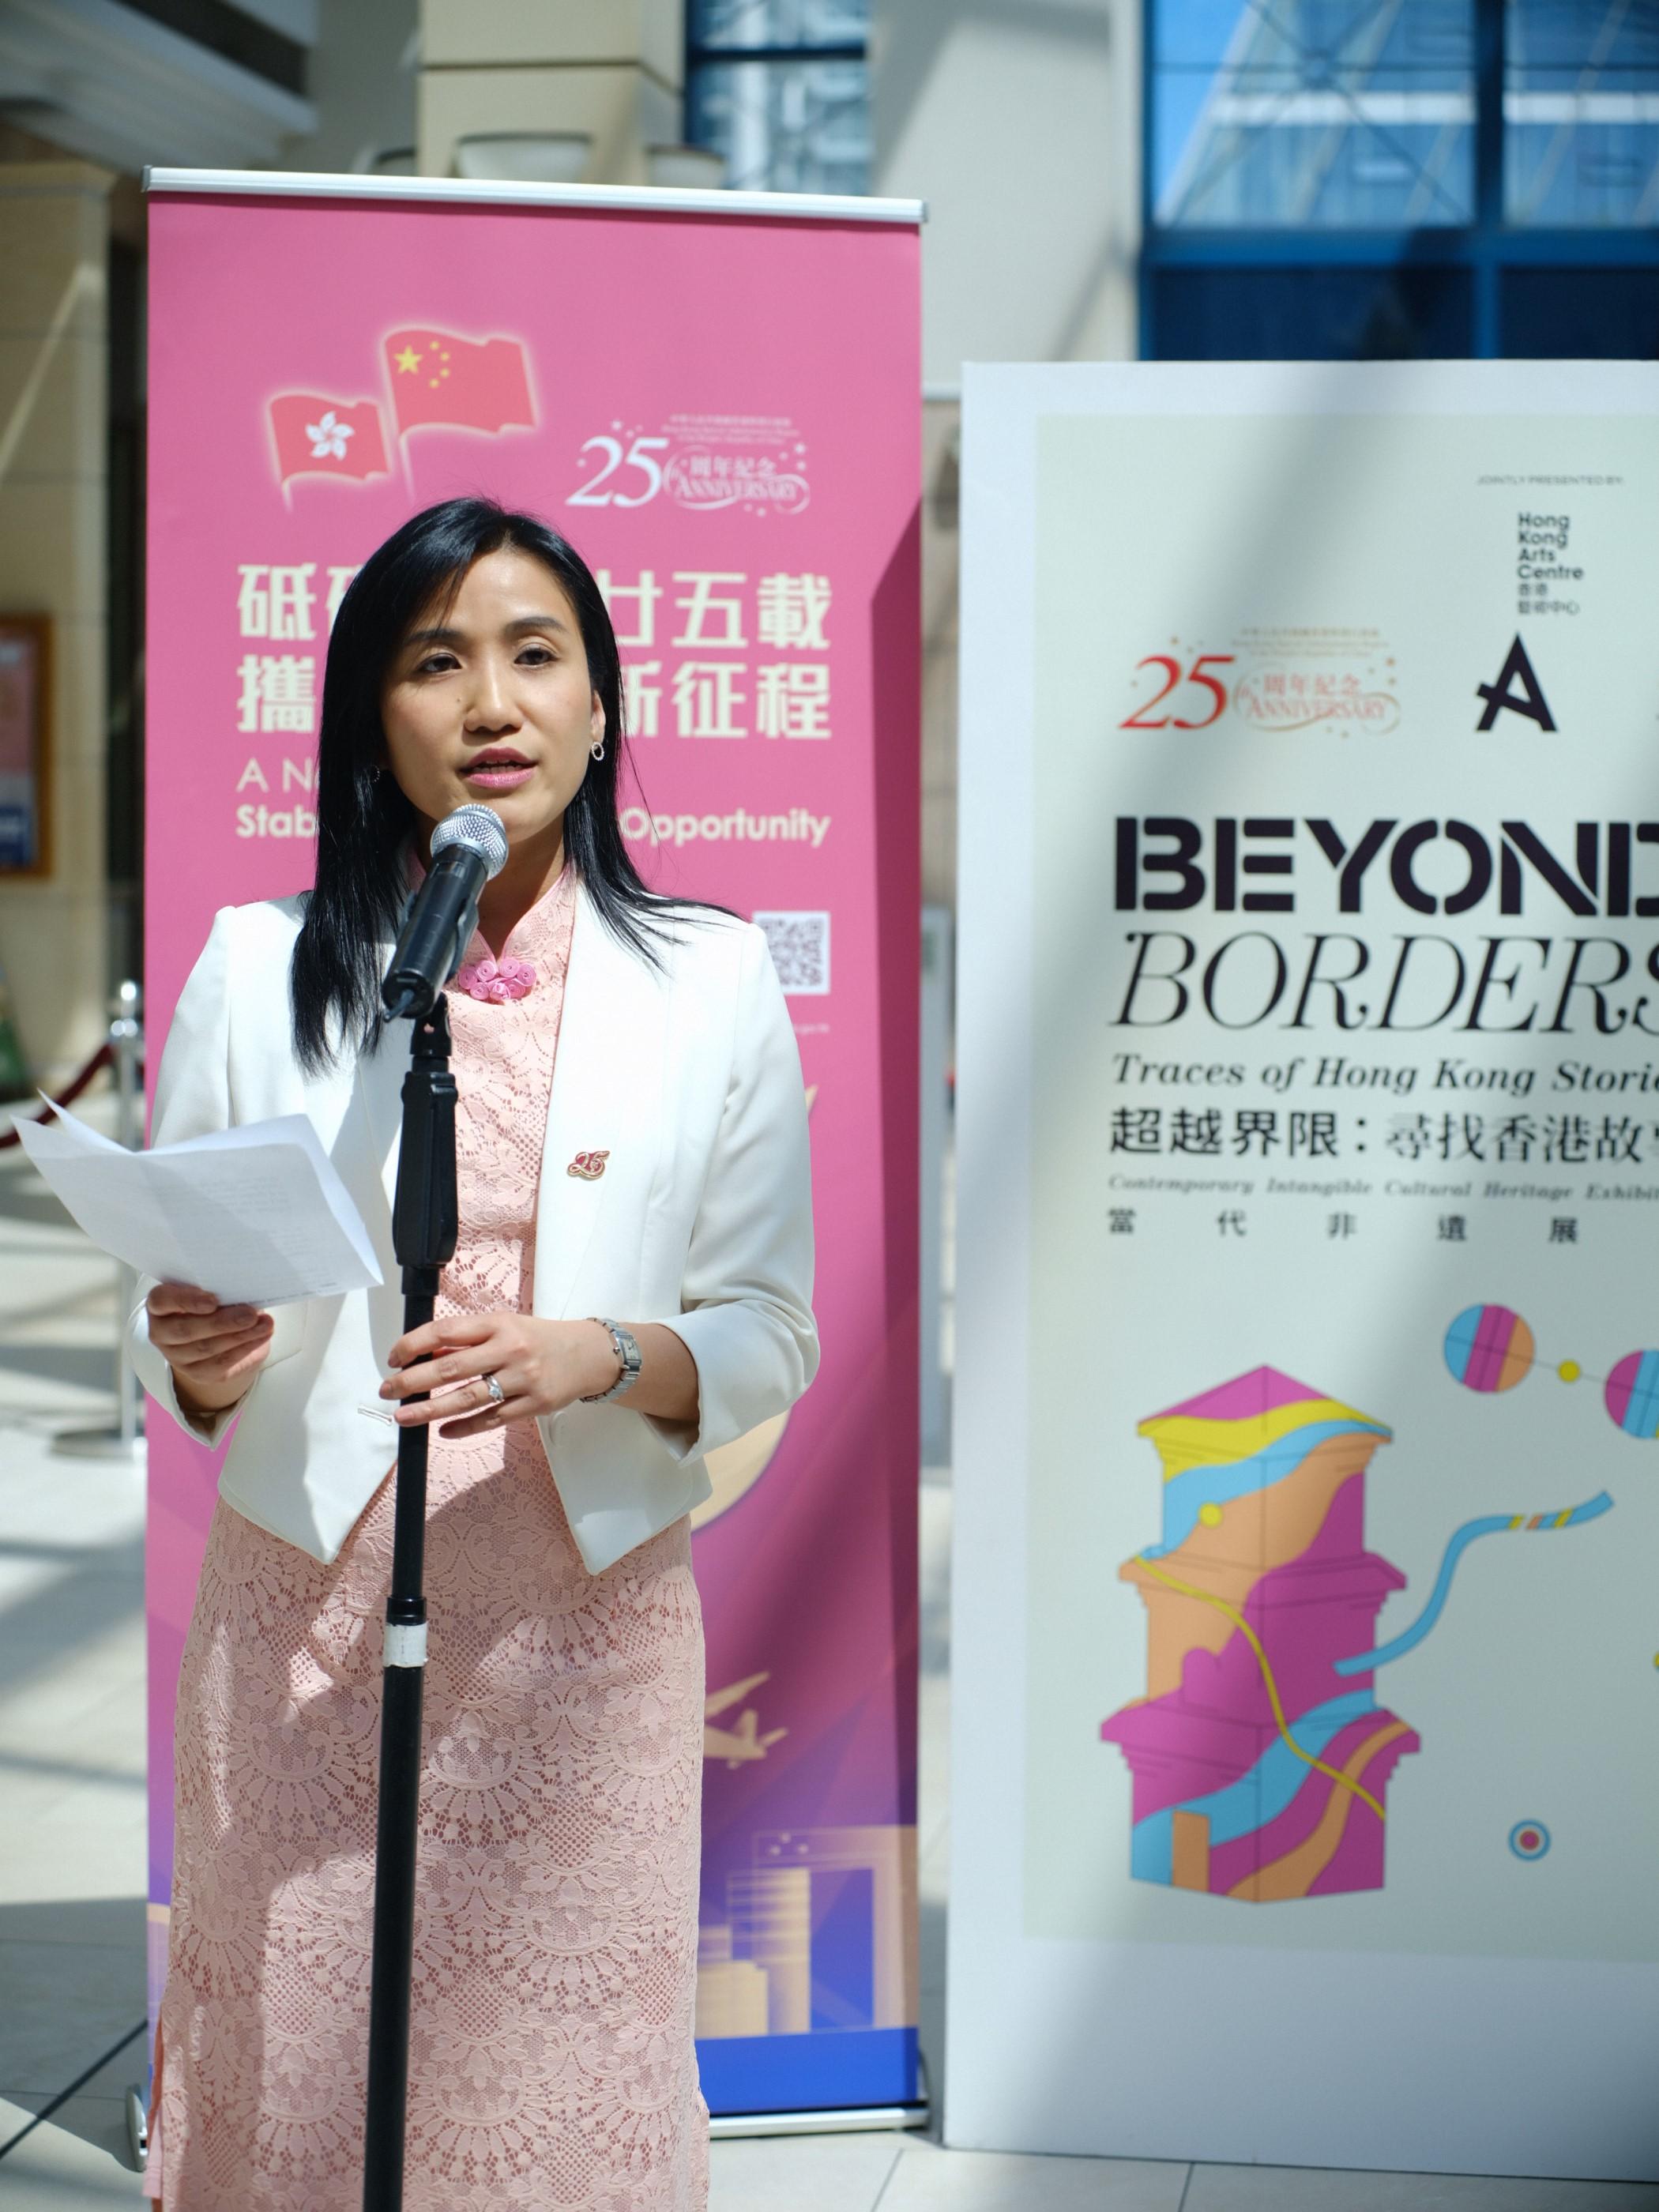 The Director of the Hong Kong Economic and Trade Office (Toronto), Ms Emily Mo, speaks at the opening ceremony of the "Beyond Borders: Traces of Hong Kong Stories" art exhibition in Vancouver yesterday (June 22, Vancouver time).